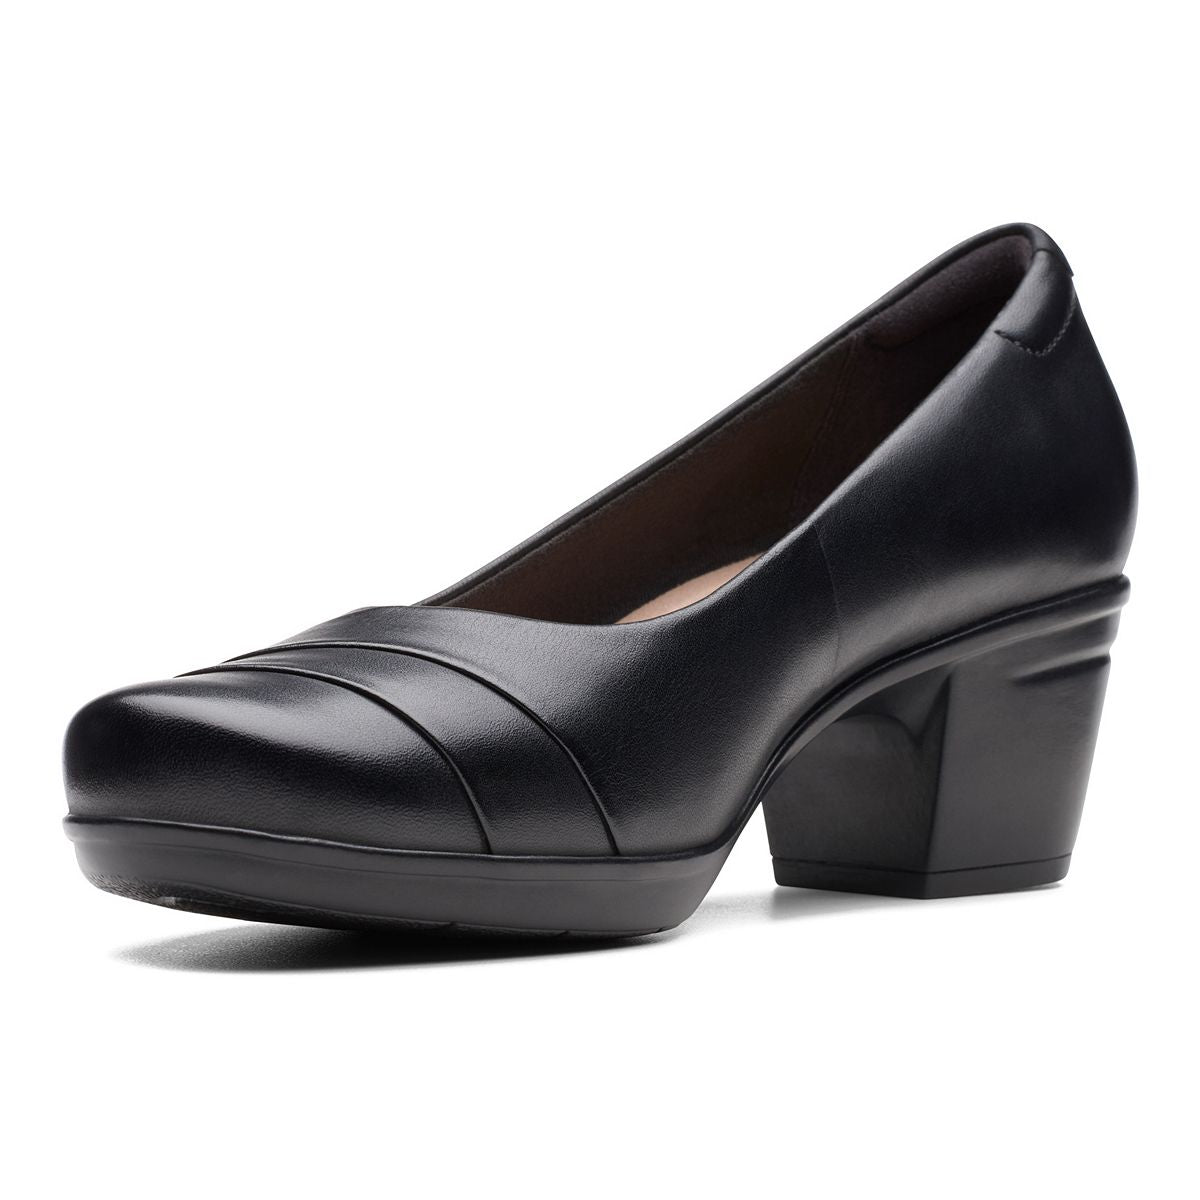 Clarks Clarks Collection Womens Emsl Black Leather 8M